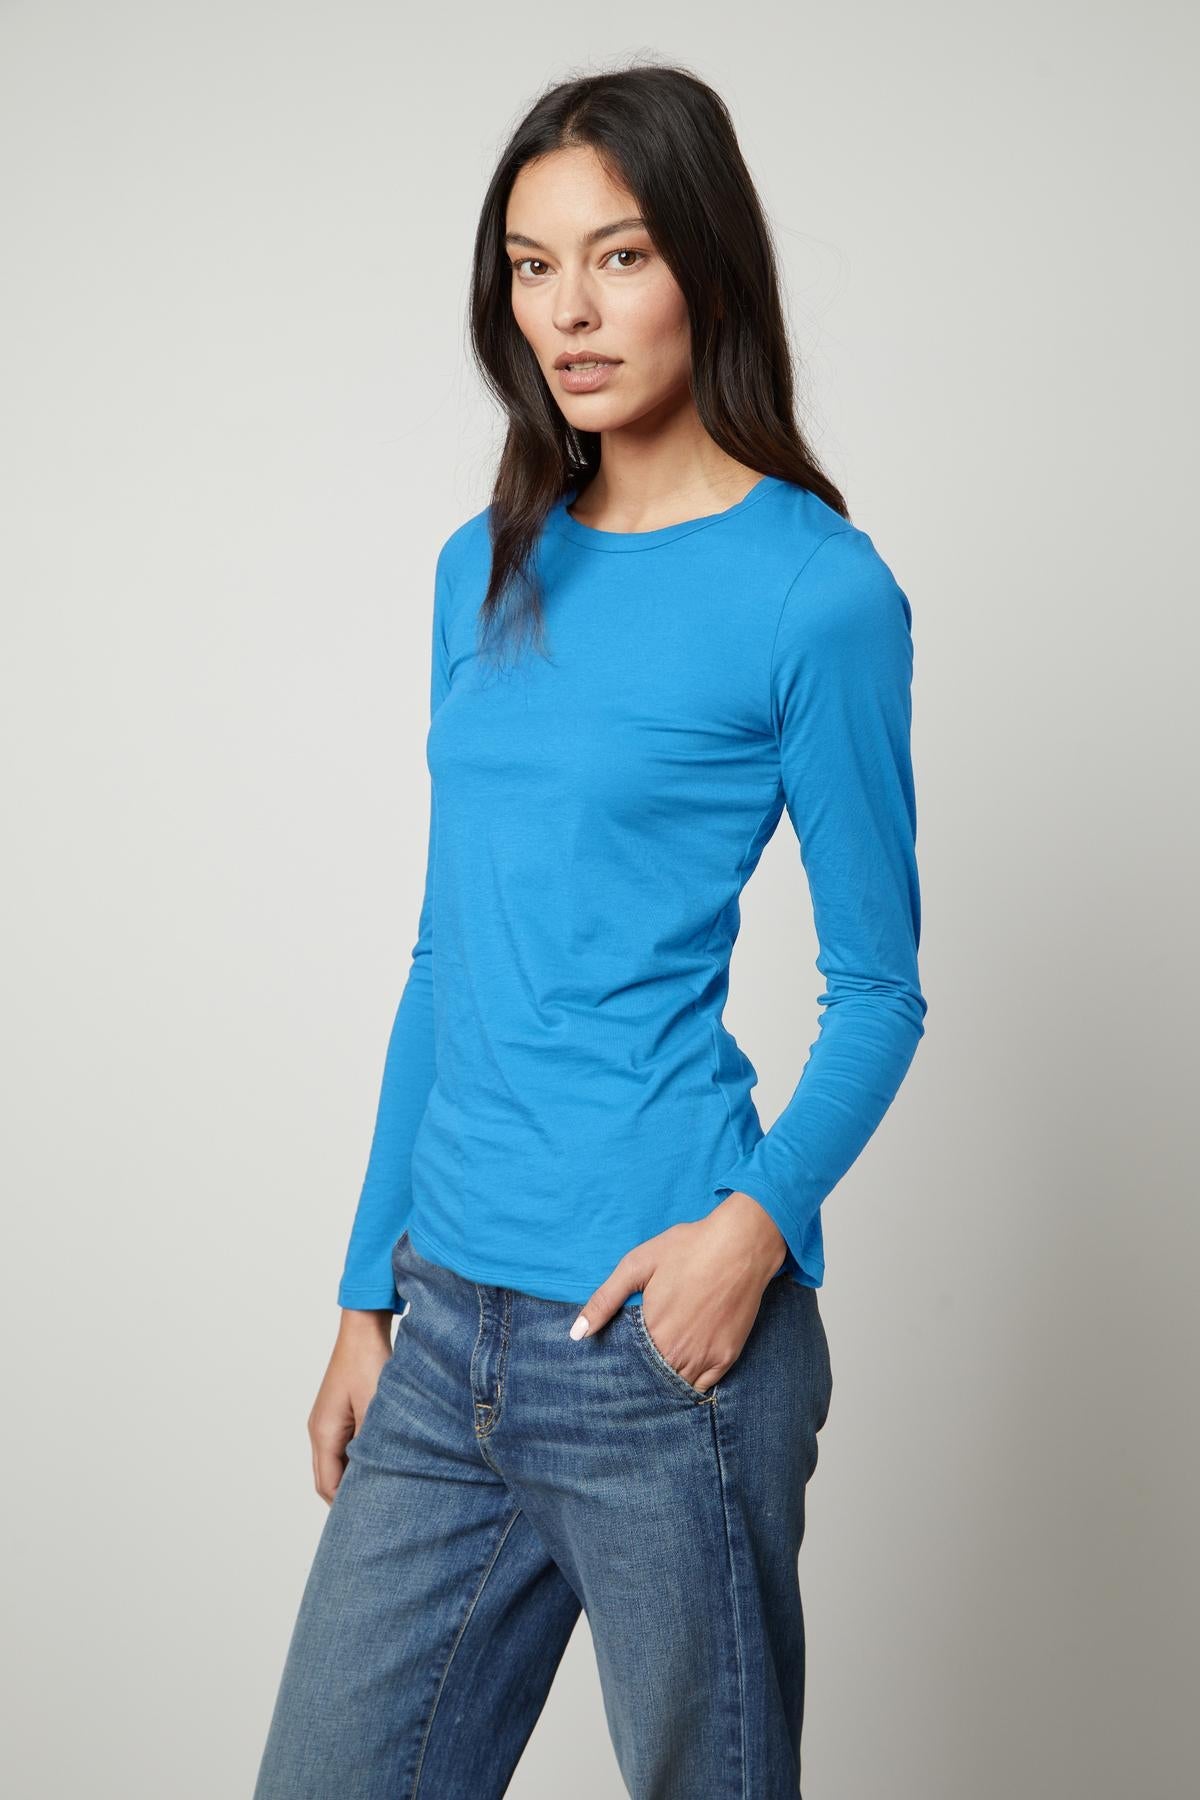 A woman wearing a blue long sleeve ZOFINA GAUZY WHISPER FITTED CREW NECK TEE made from soft gauzy whisper cotton by Velvet by Graham & Spencer.-36594704908481